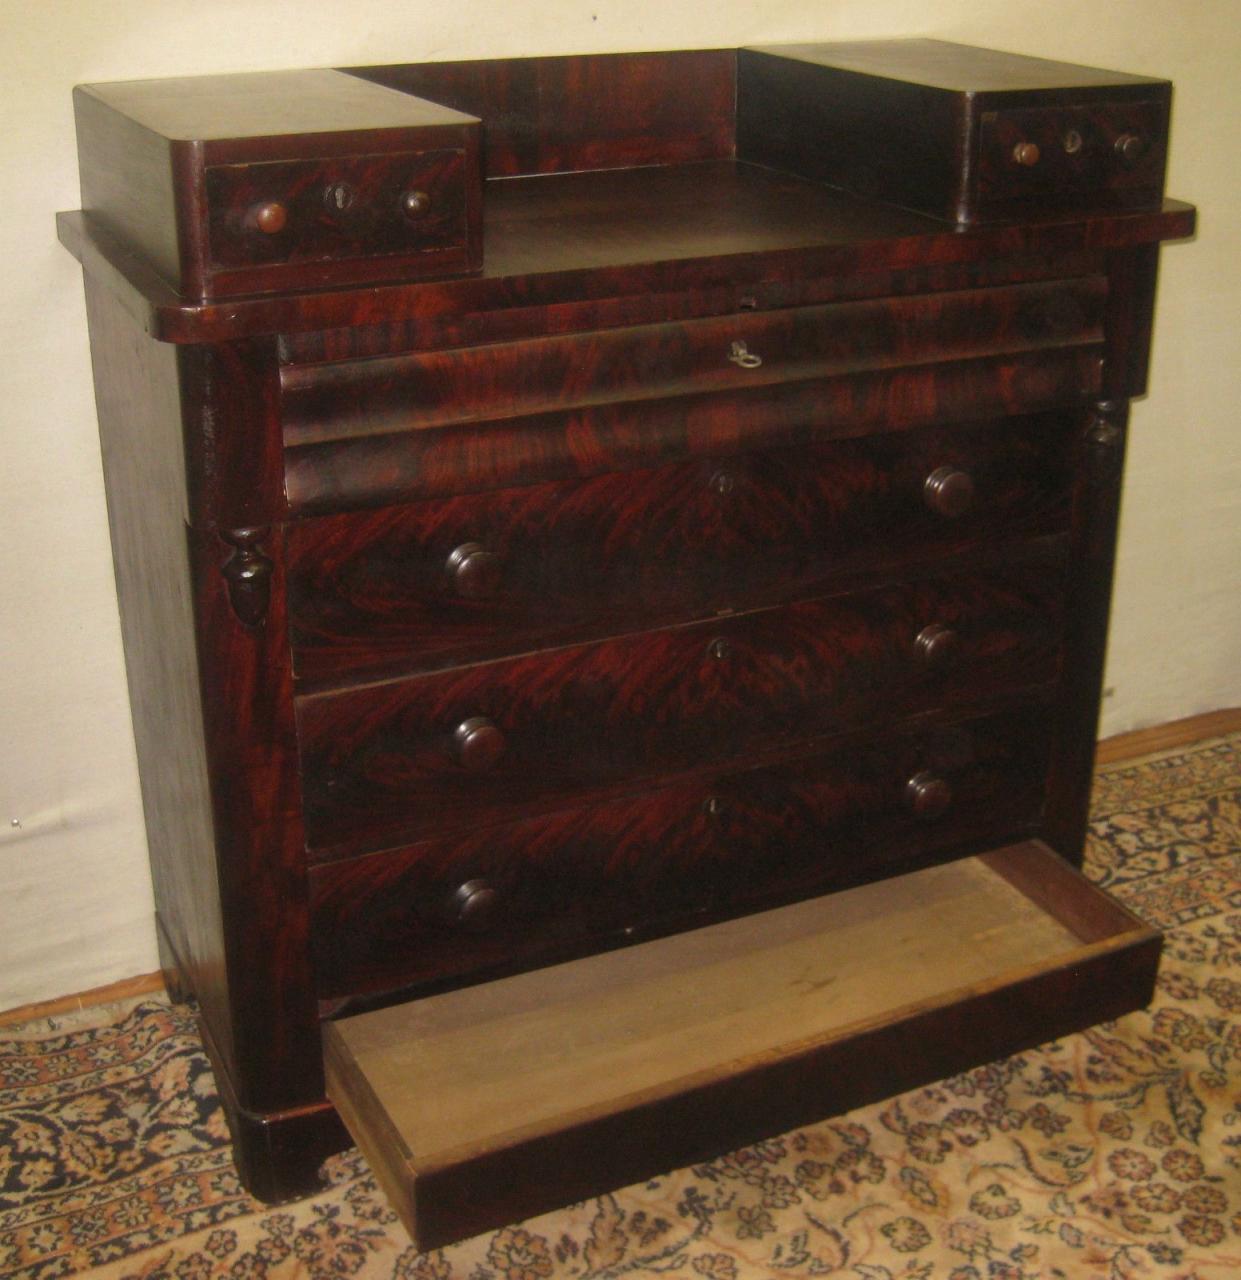 Chest Of Drawers With Hidden Compartment Hidden compartments, Antique